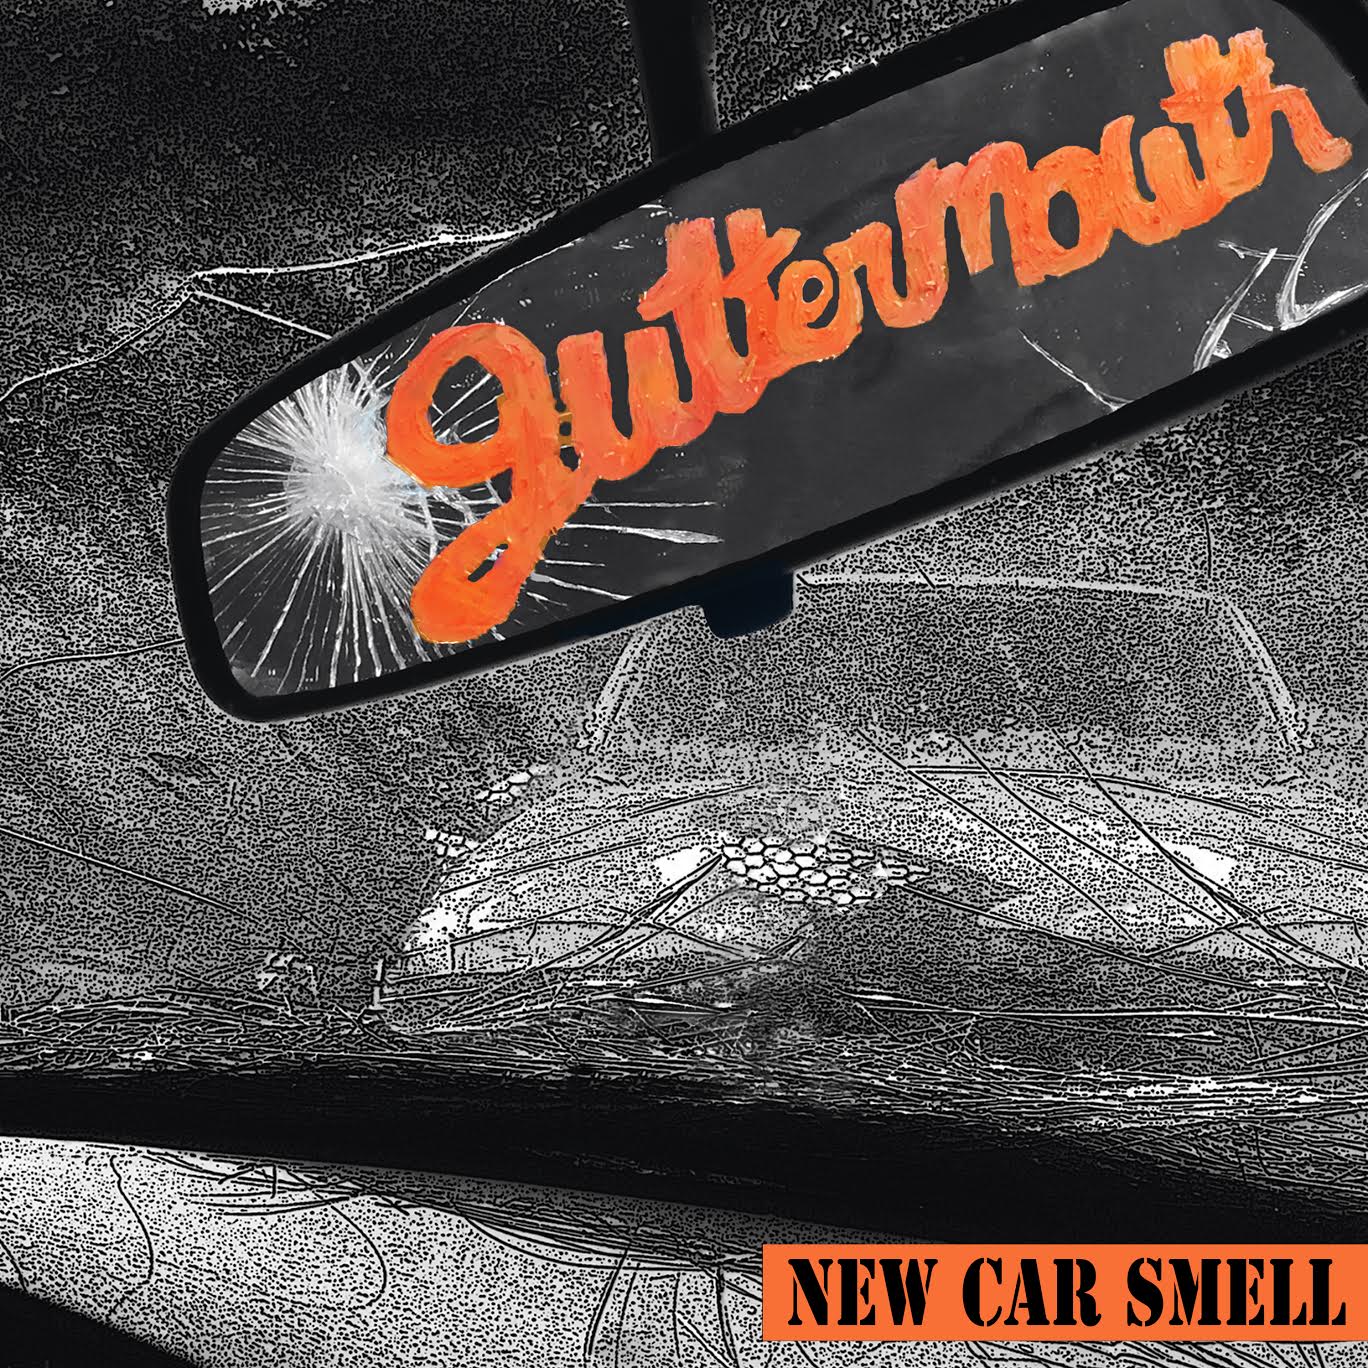 Guttermouth – New Car Smell